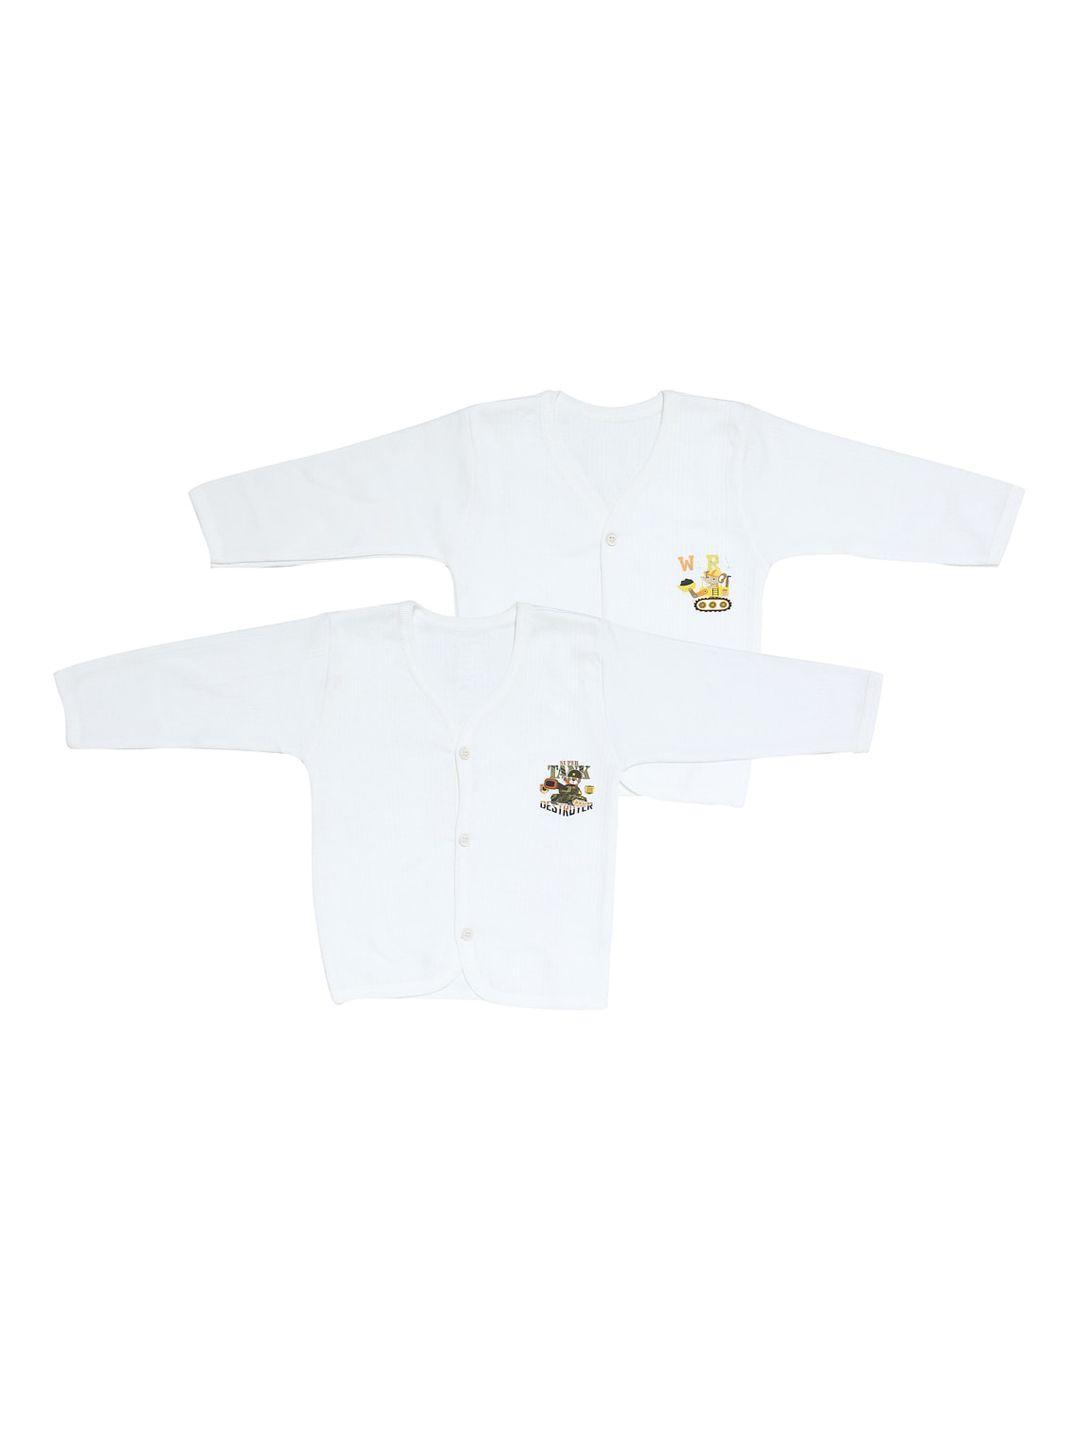 yk infants pack of 2 off-white thermal tops